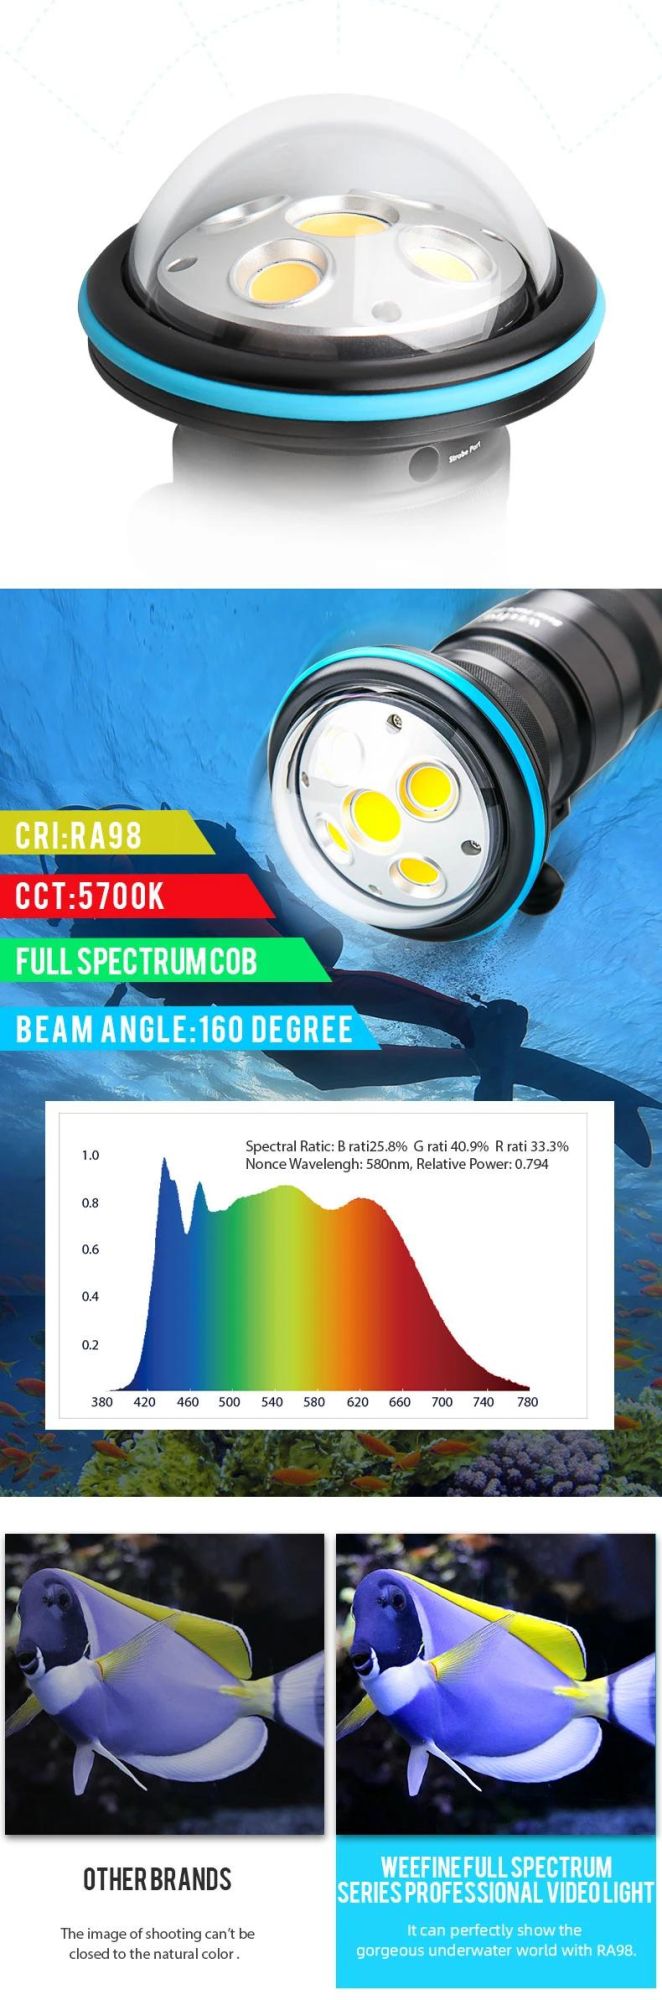 High Strobe Intensity Professional Diving Light for Photographer with Operation by Remote Control Underwater